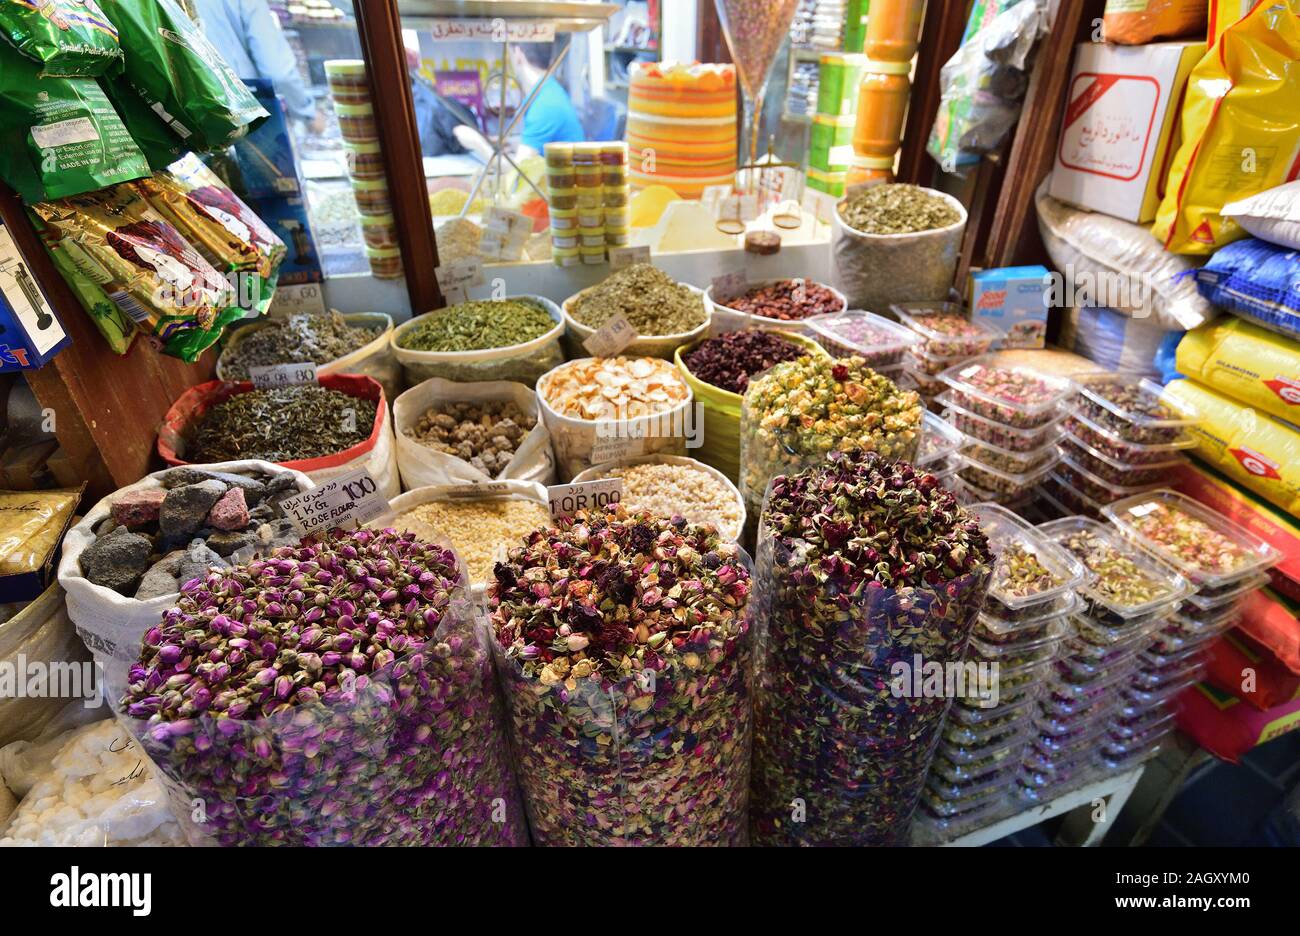 Doha, Qatar - Nov 21. 2019. Dry rose flowers and other spices on Souq Waqif - marketplace for selling traditional garments Stock Photo